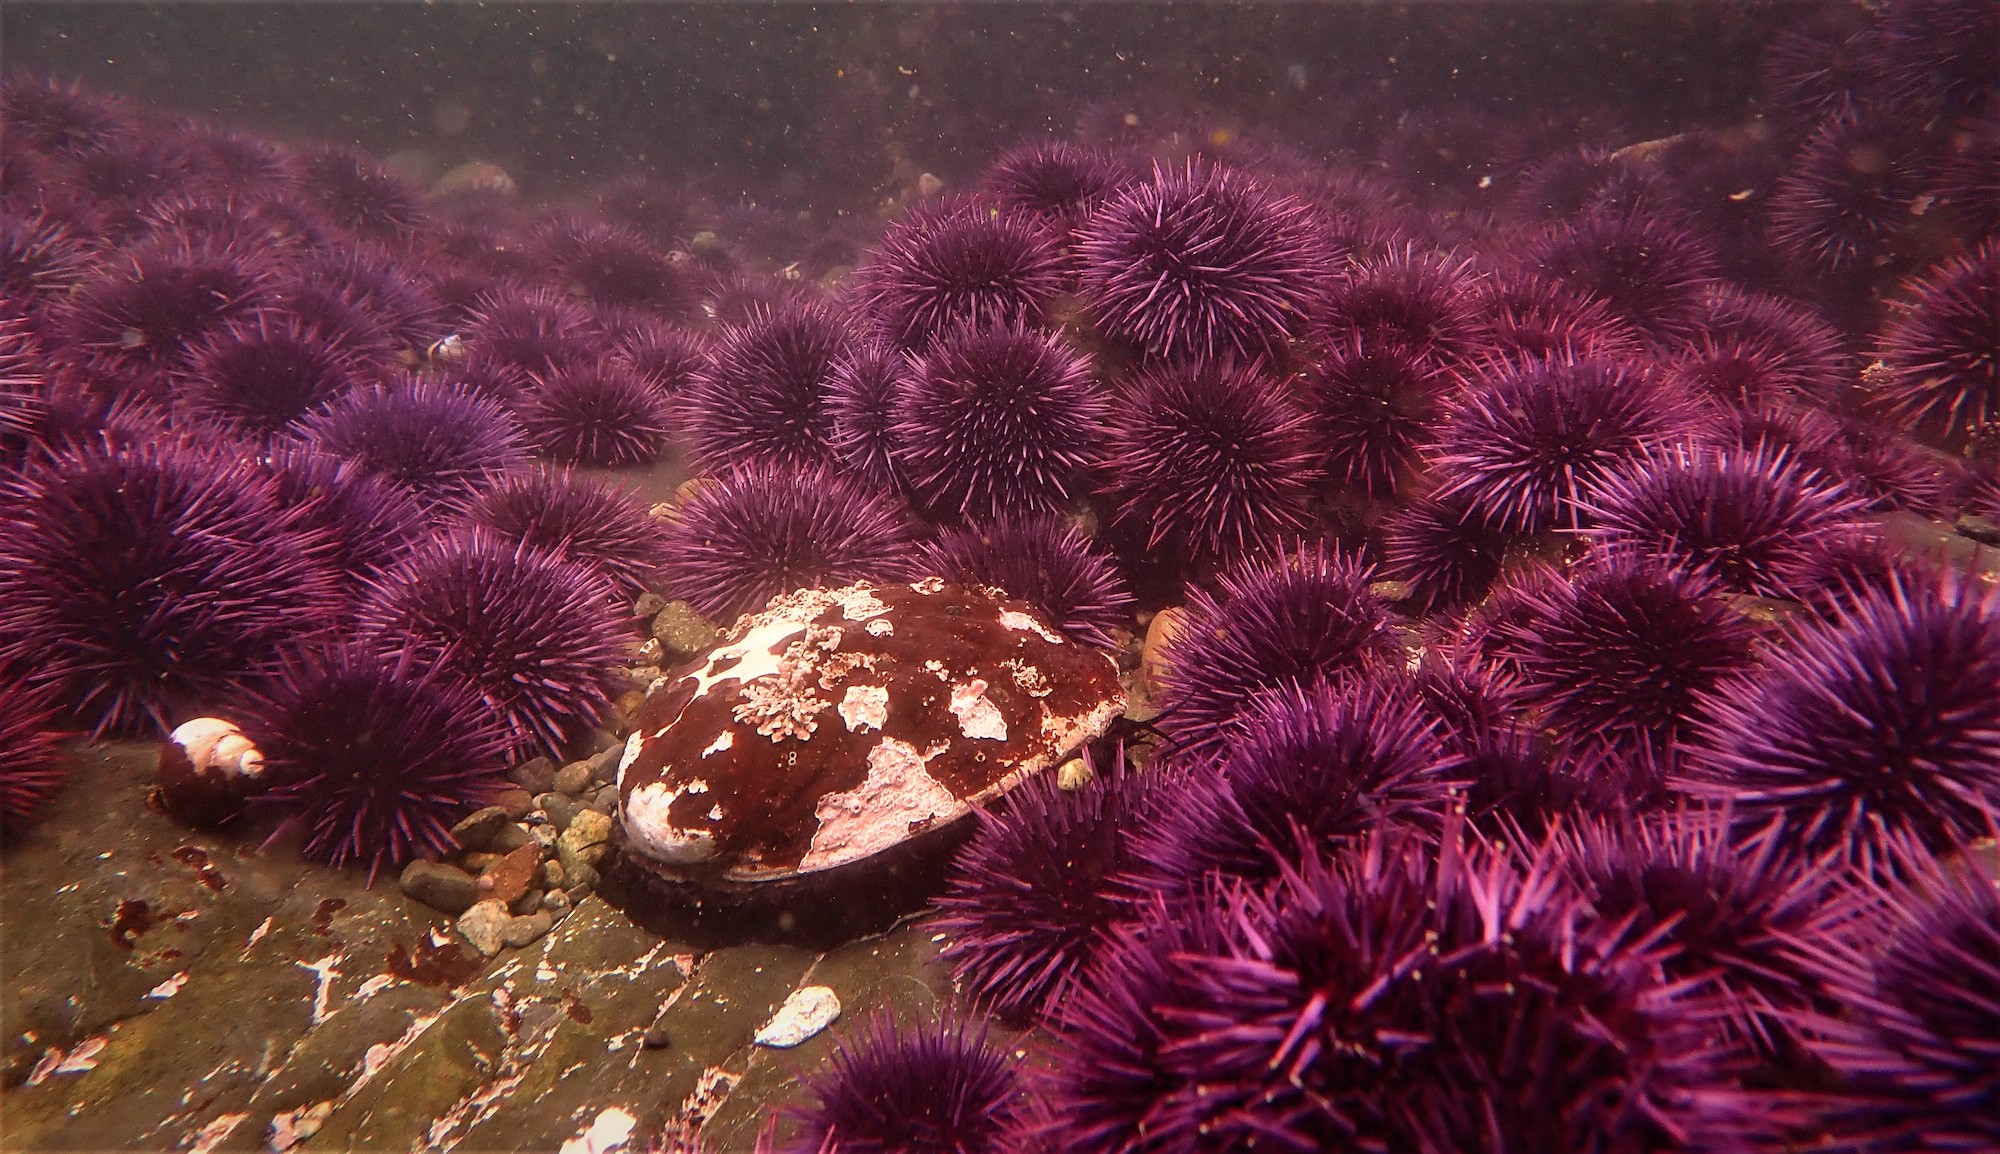 red abalone surrounded by purple urchins